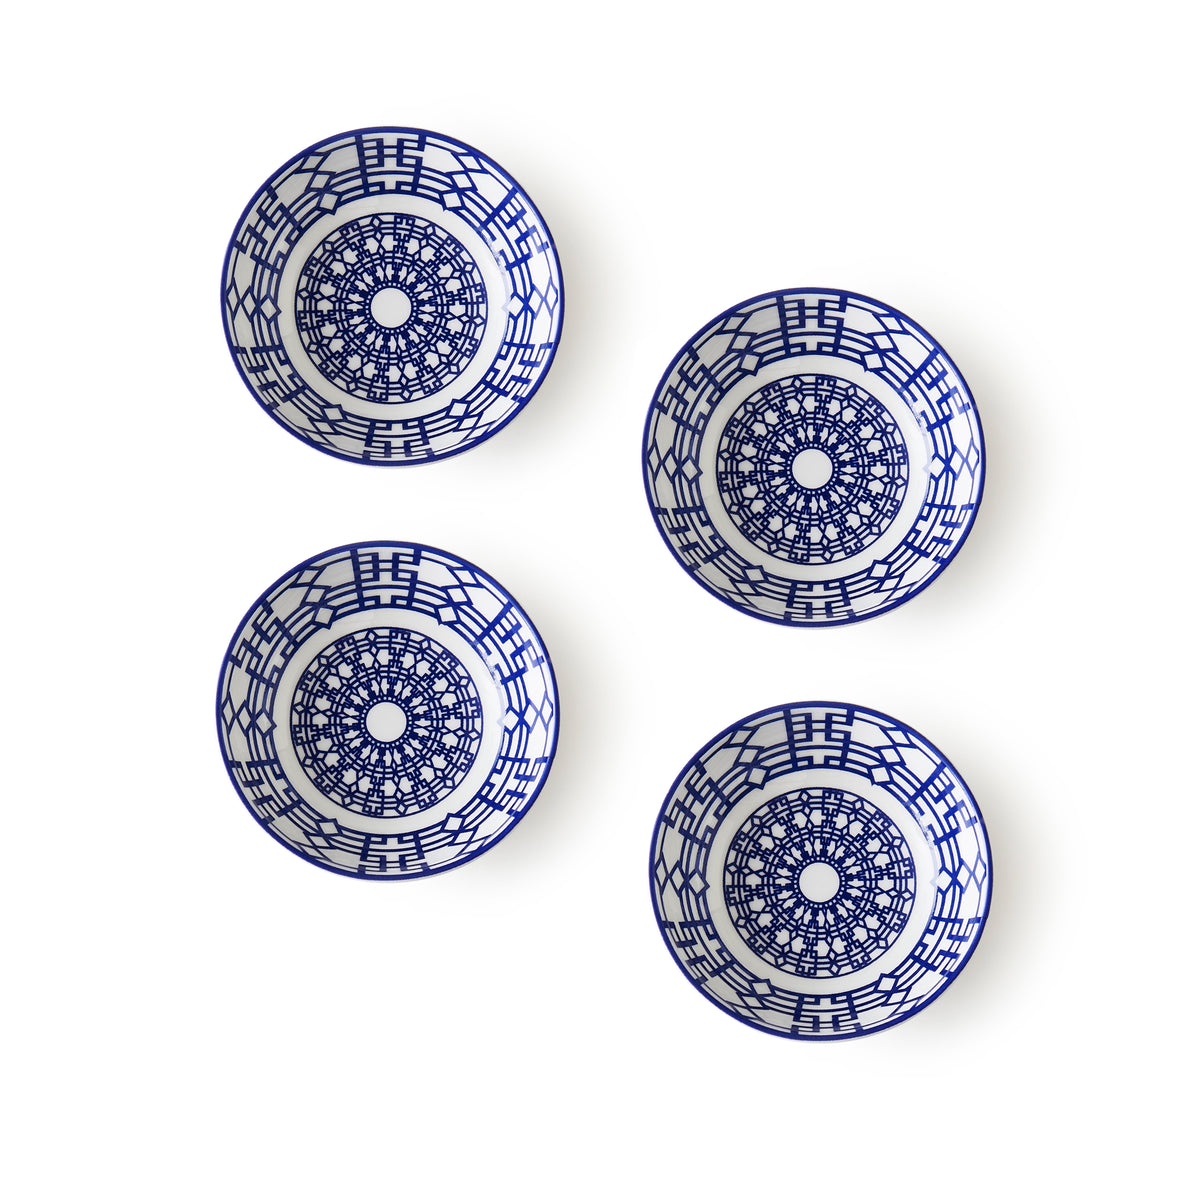 Four Newport Dipping Dishes, Set of 4 by Caskata with intricate blue geometric patterns, reminiscent of the Newport Garden Gate&#39;s interlocking lattice pattern, are evenly spaced against a plain white background.